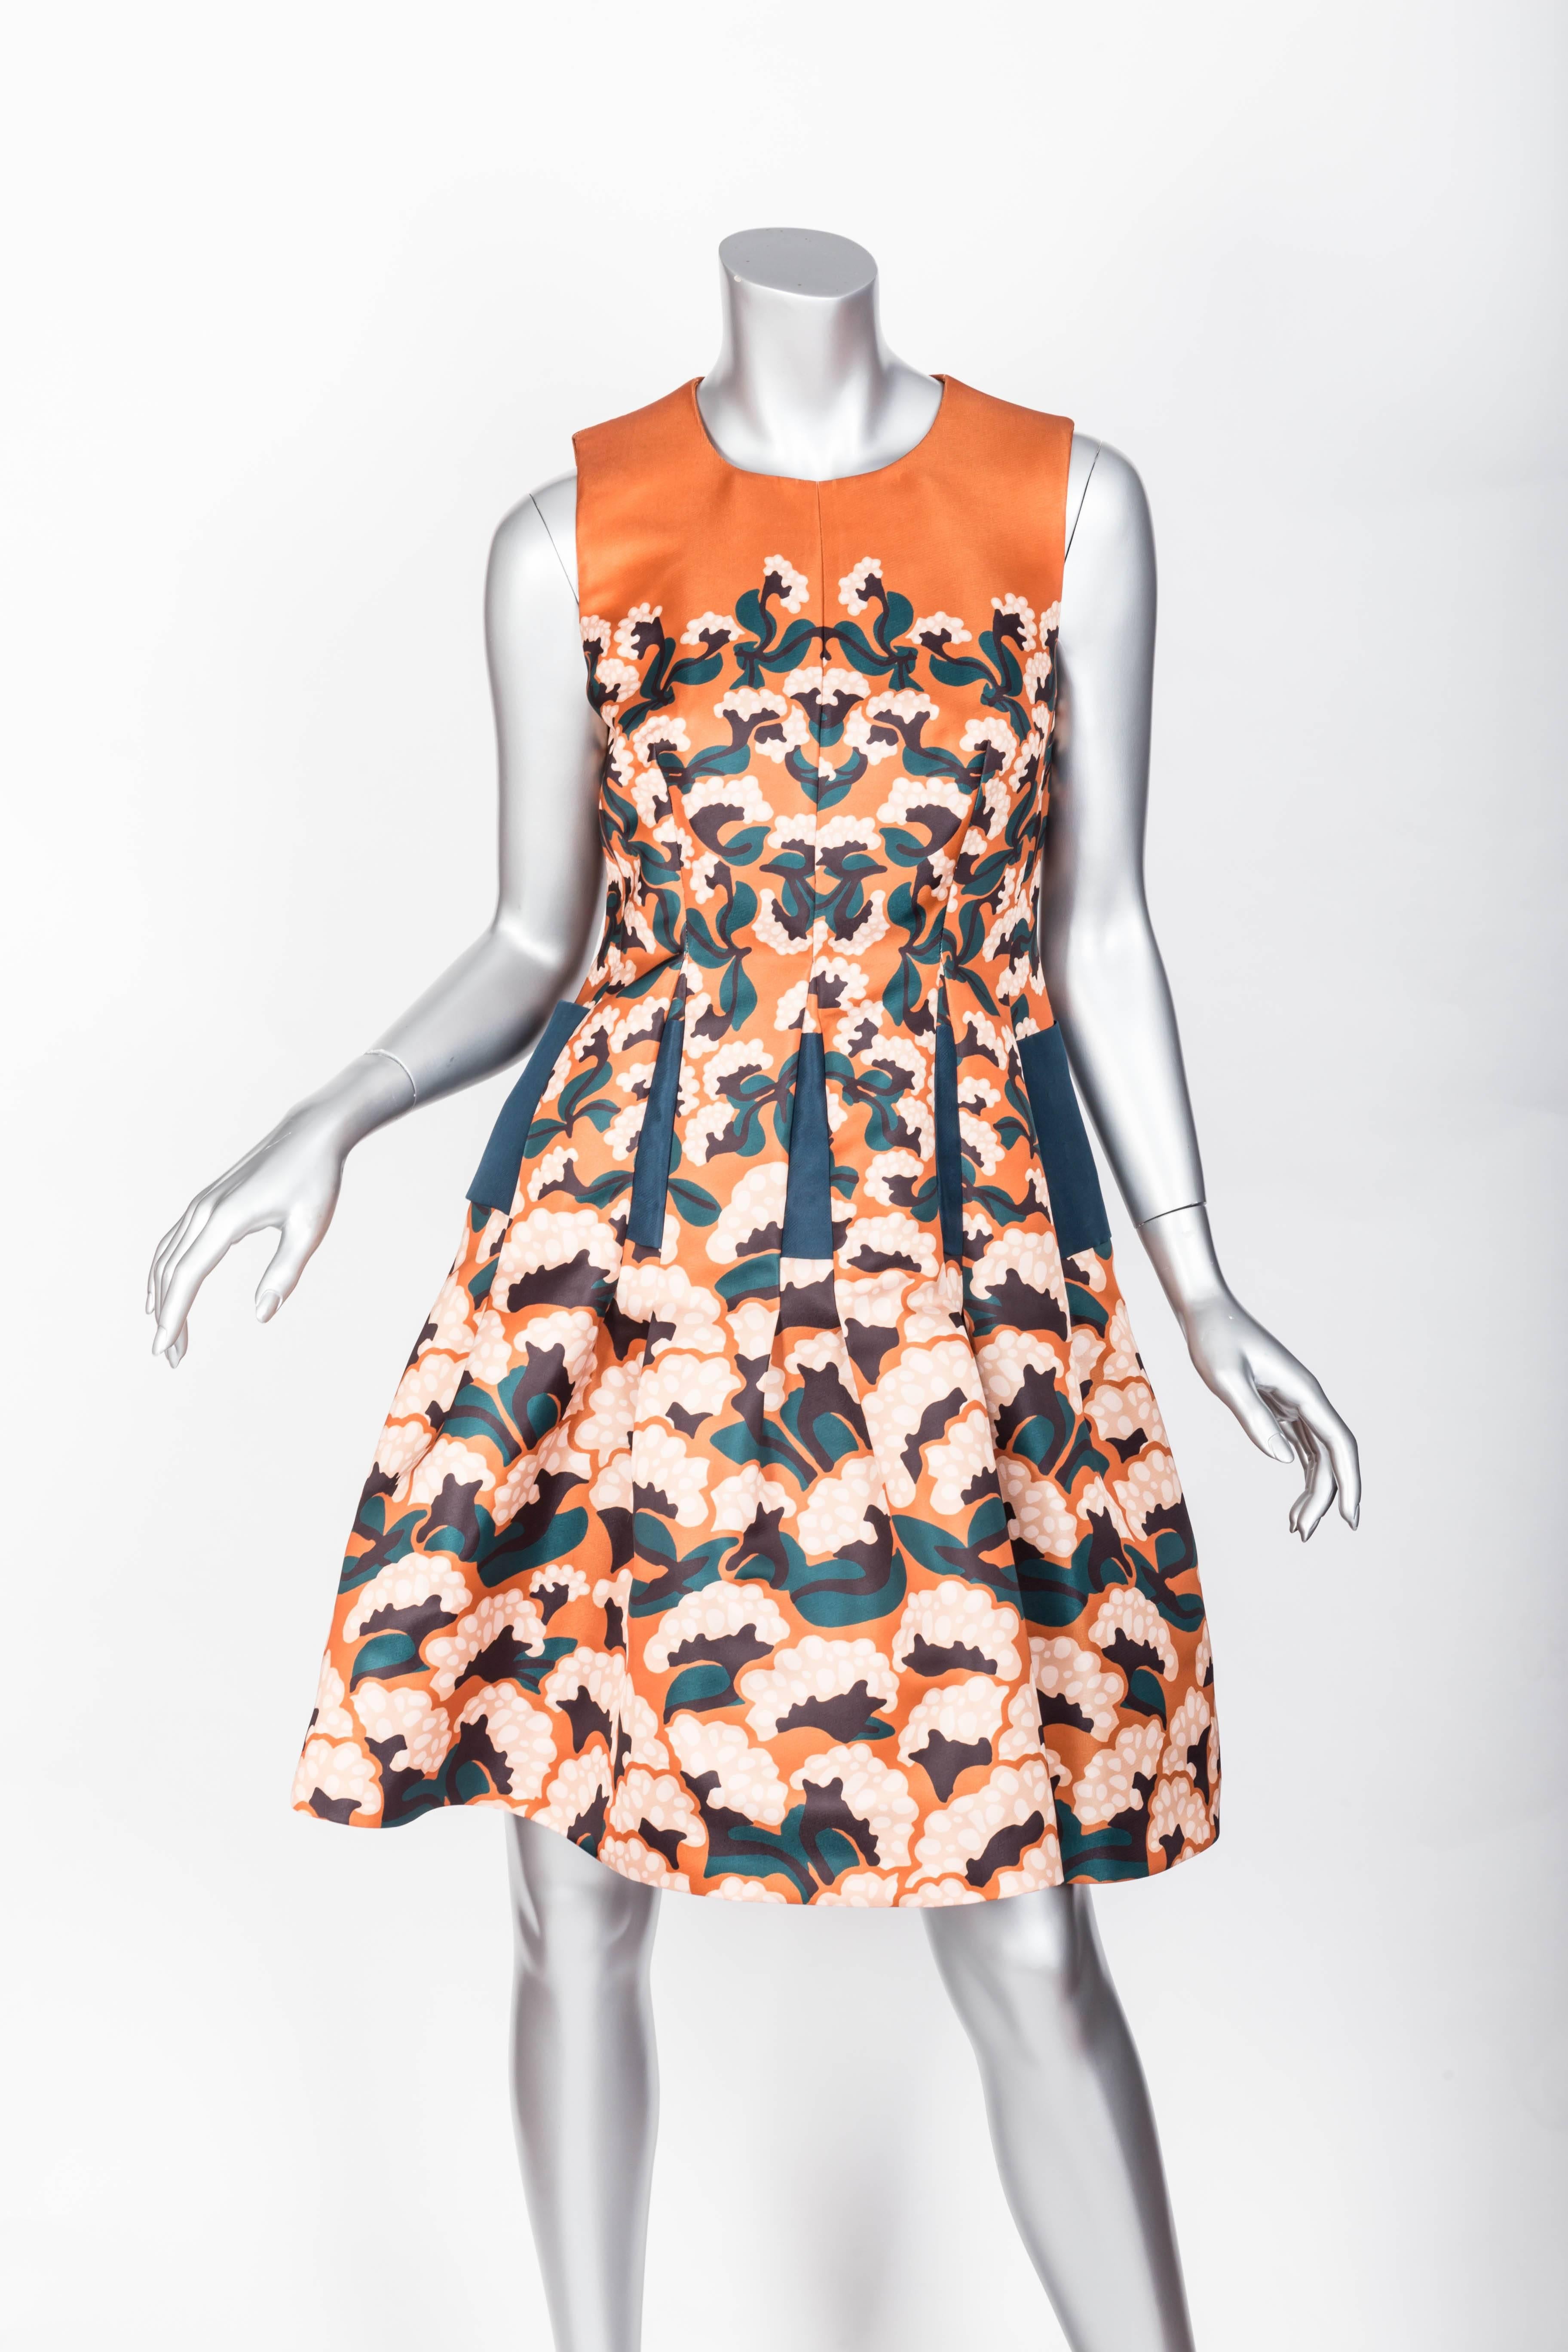 Gorgeous Thakoon Dress with floral print in shades of burnt orange, teal, cream and black.
Beautiful silhouette with very sculptural skirt and exposed back zip.
Condition is excellent.